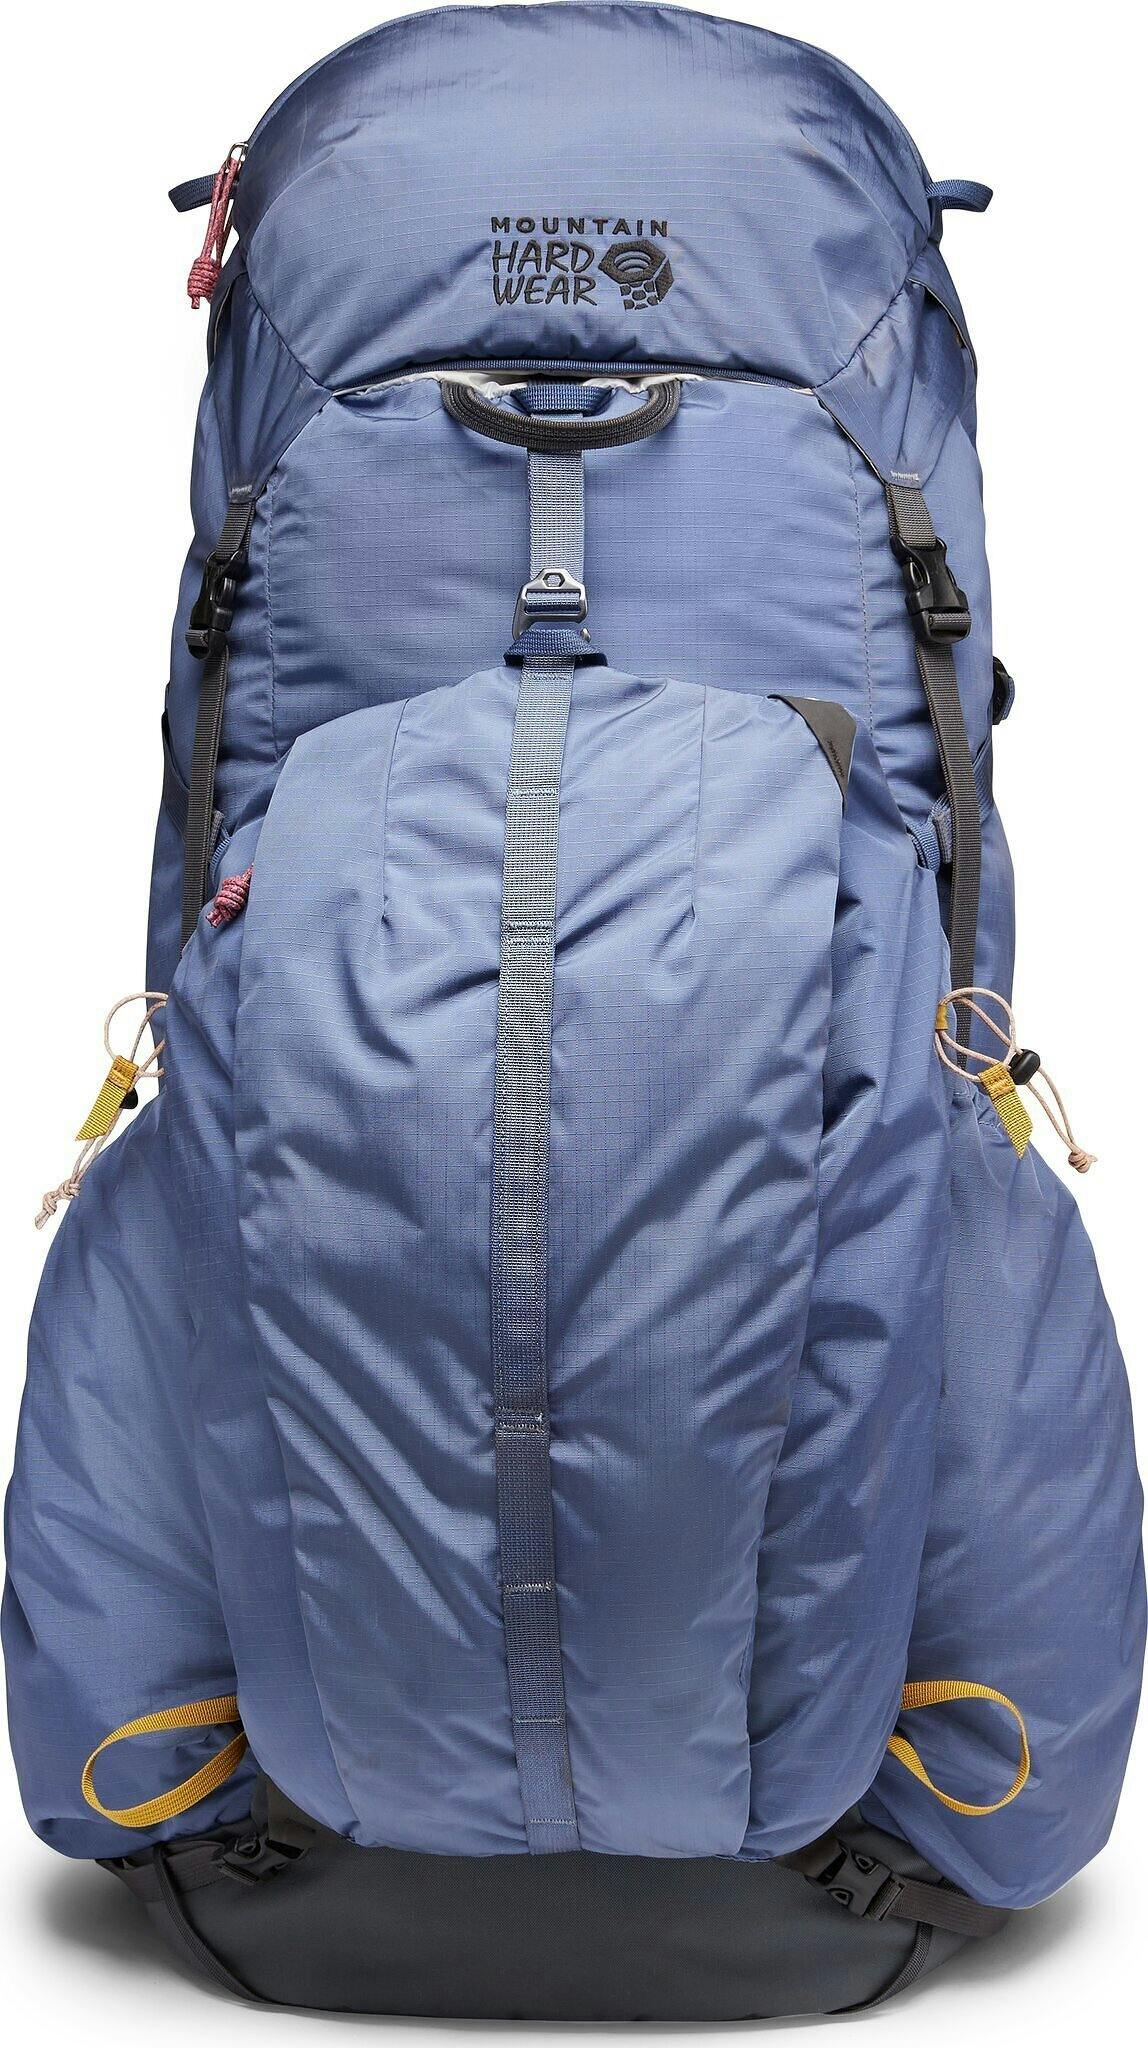 Product image for PCT W Backpack 65L - Women's